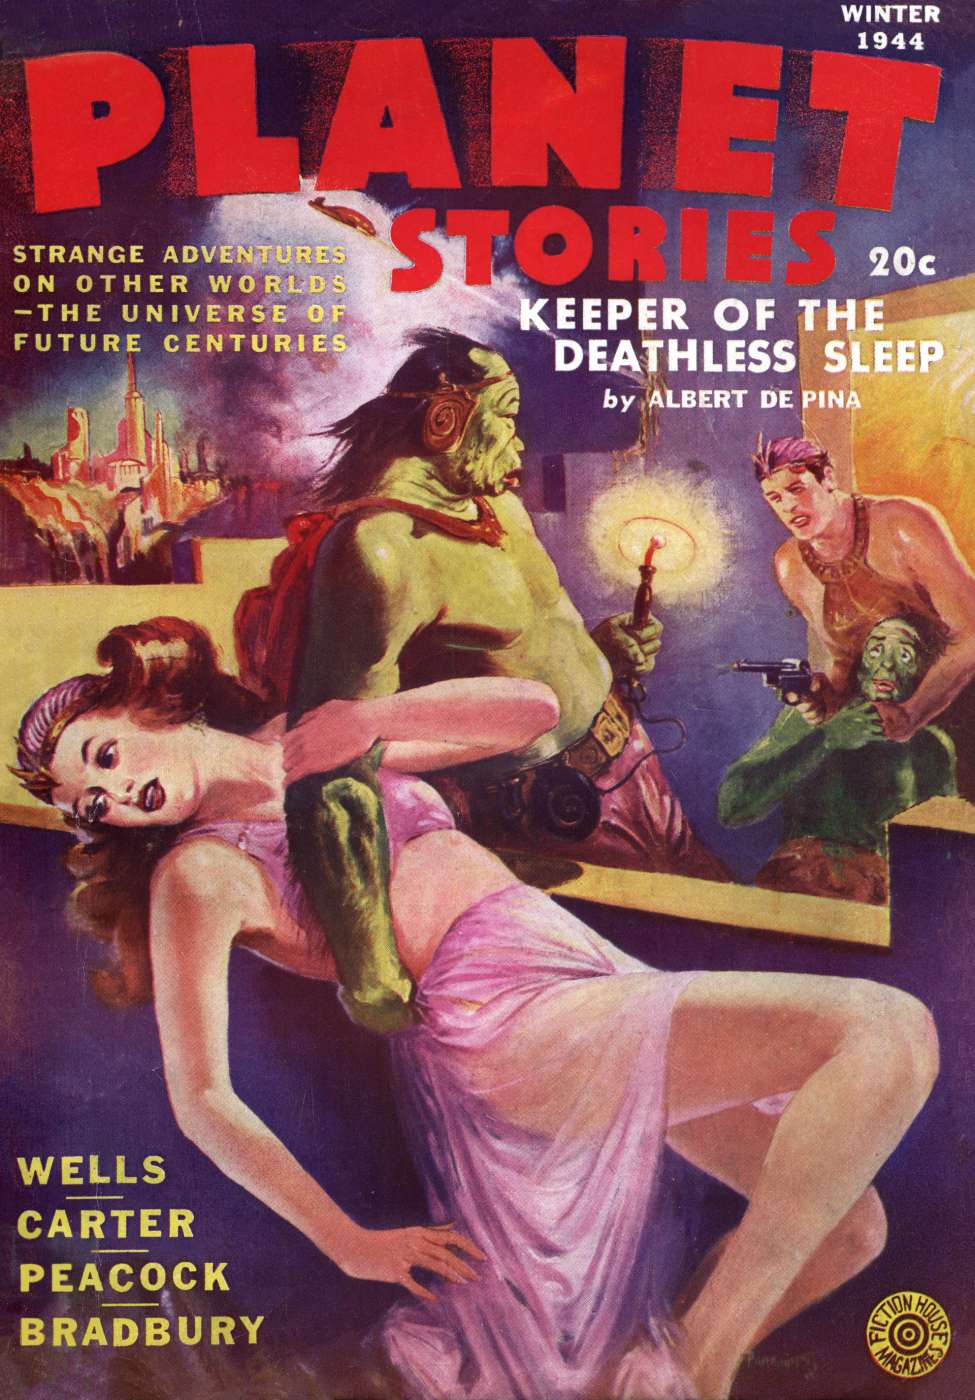 Book Cover For Planet Stories v2 9 - Keeper of the Deathless Sleep - Albert dePina